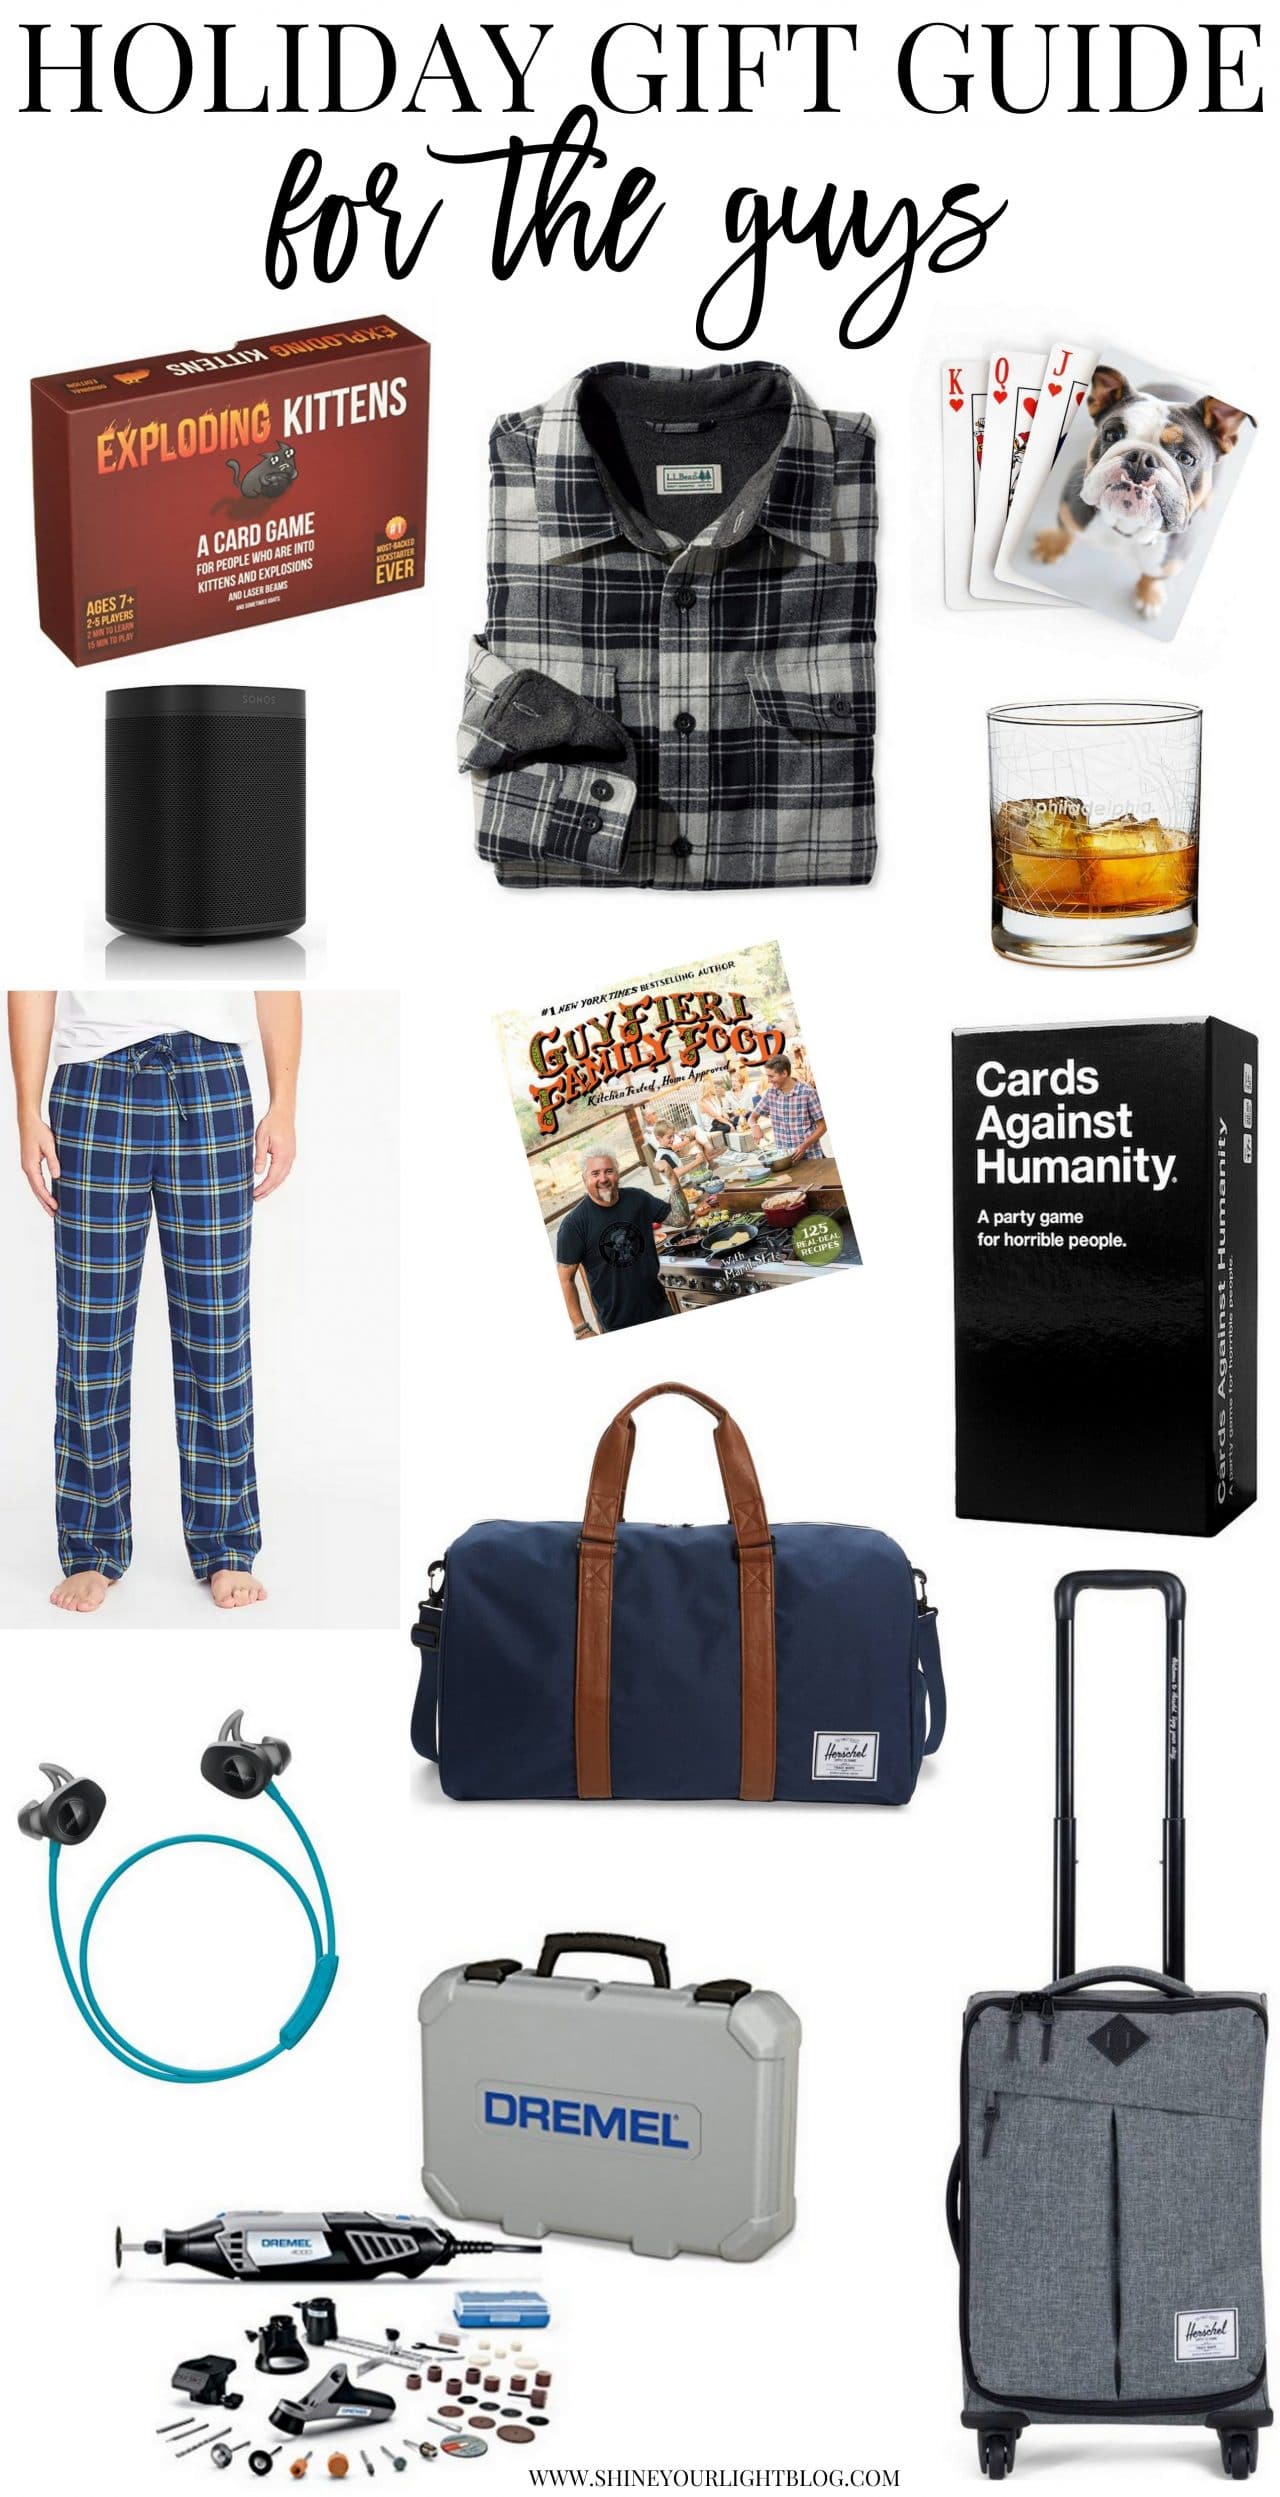 A holiday gift guide for guys.